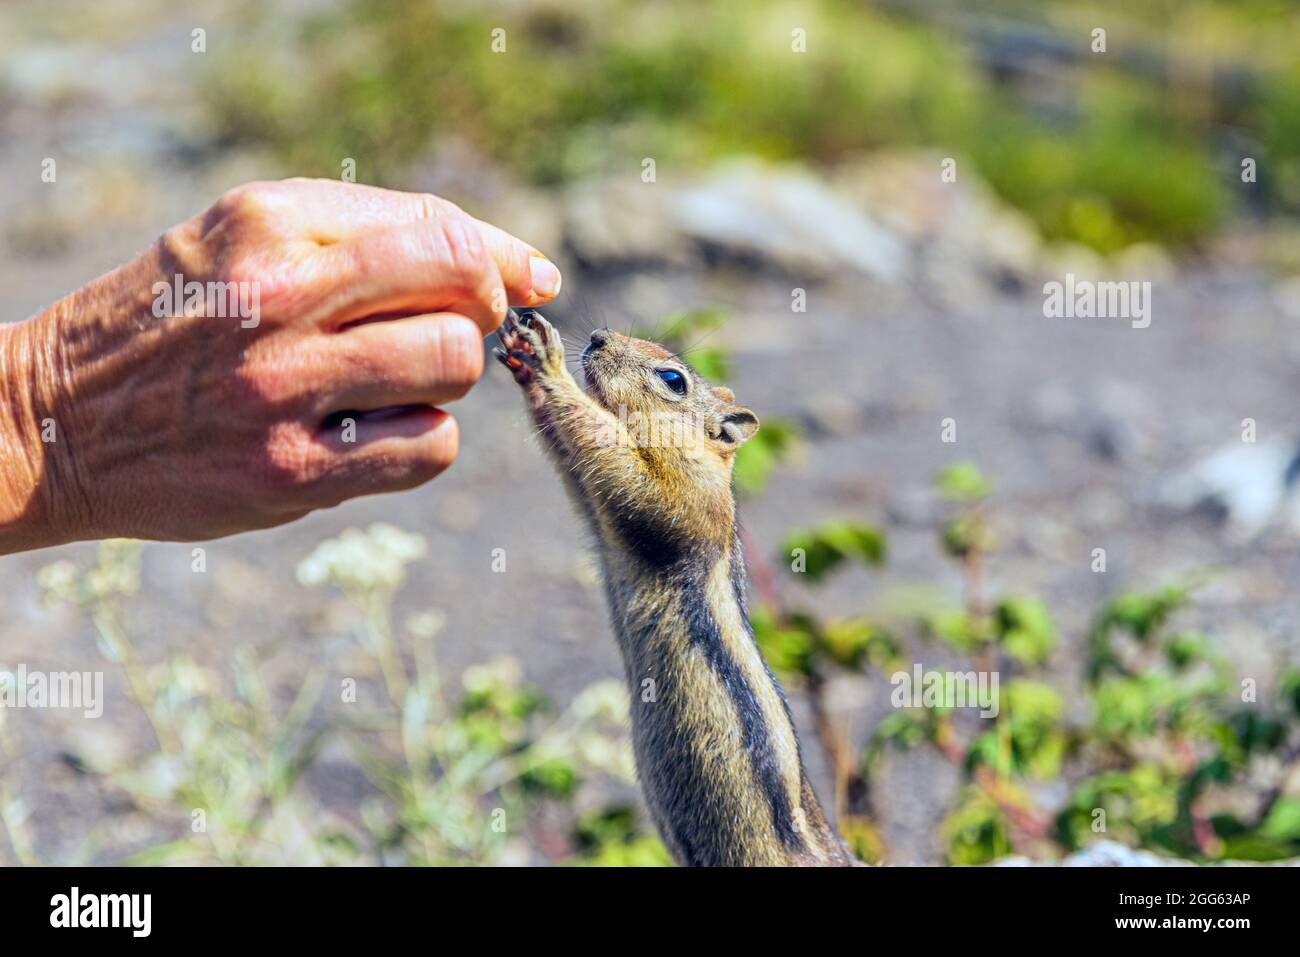 Wild chipmunk reaching for a human hand Stock Photo